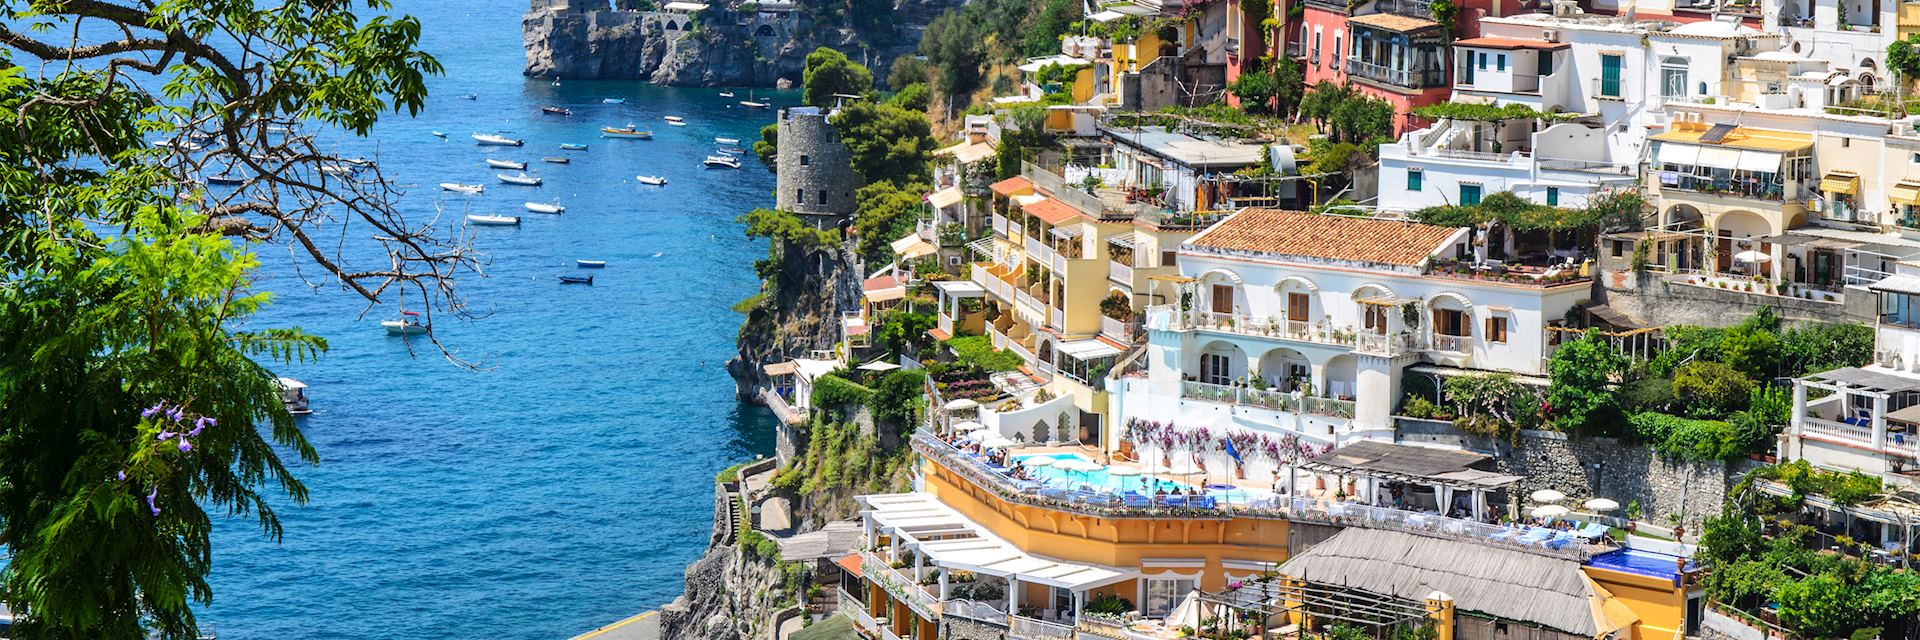 Best time Visit Amalfi Coast | Climate Guide | Audley Travel